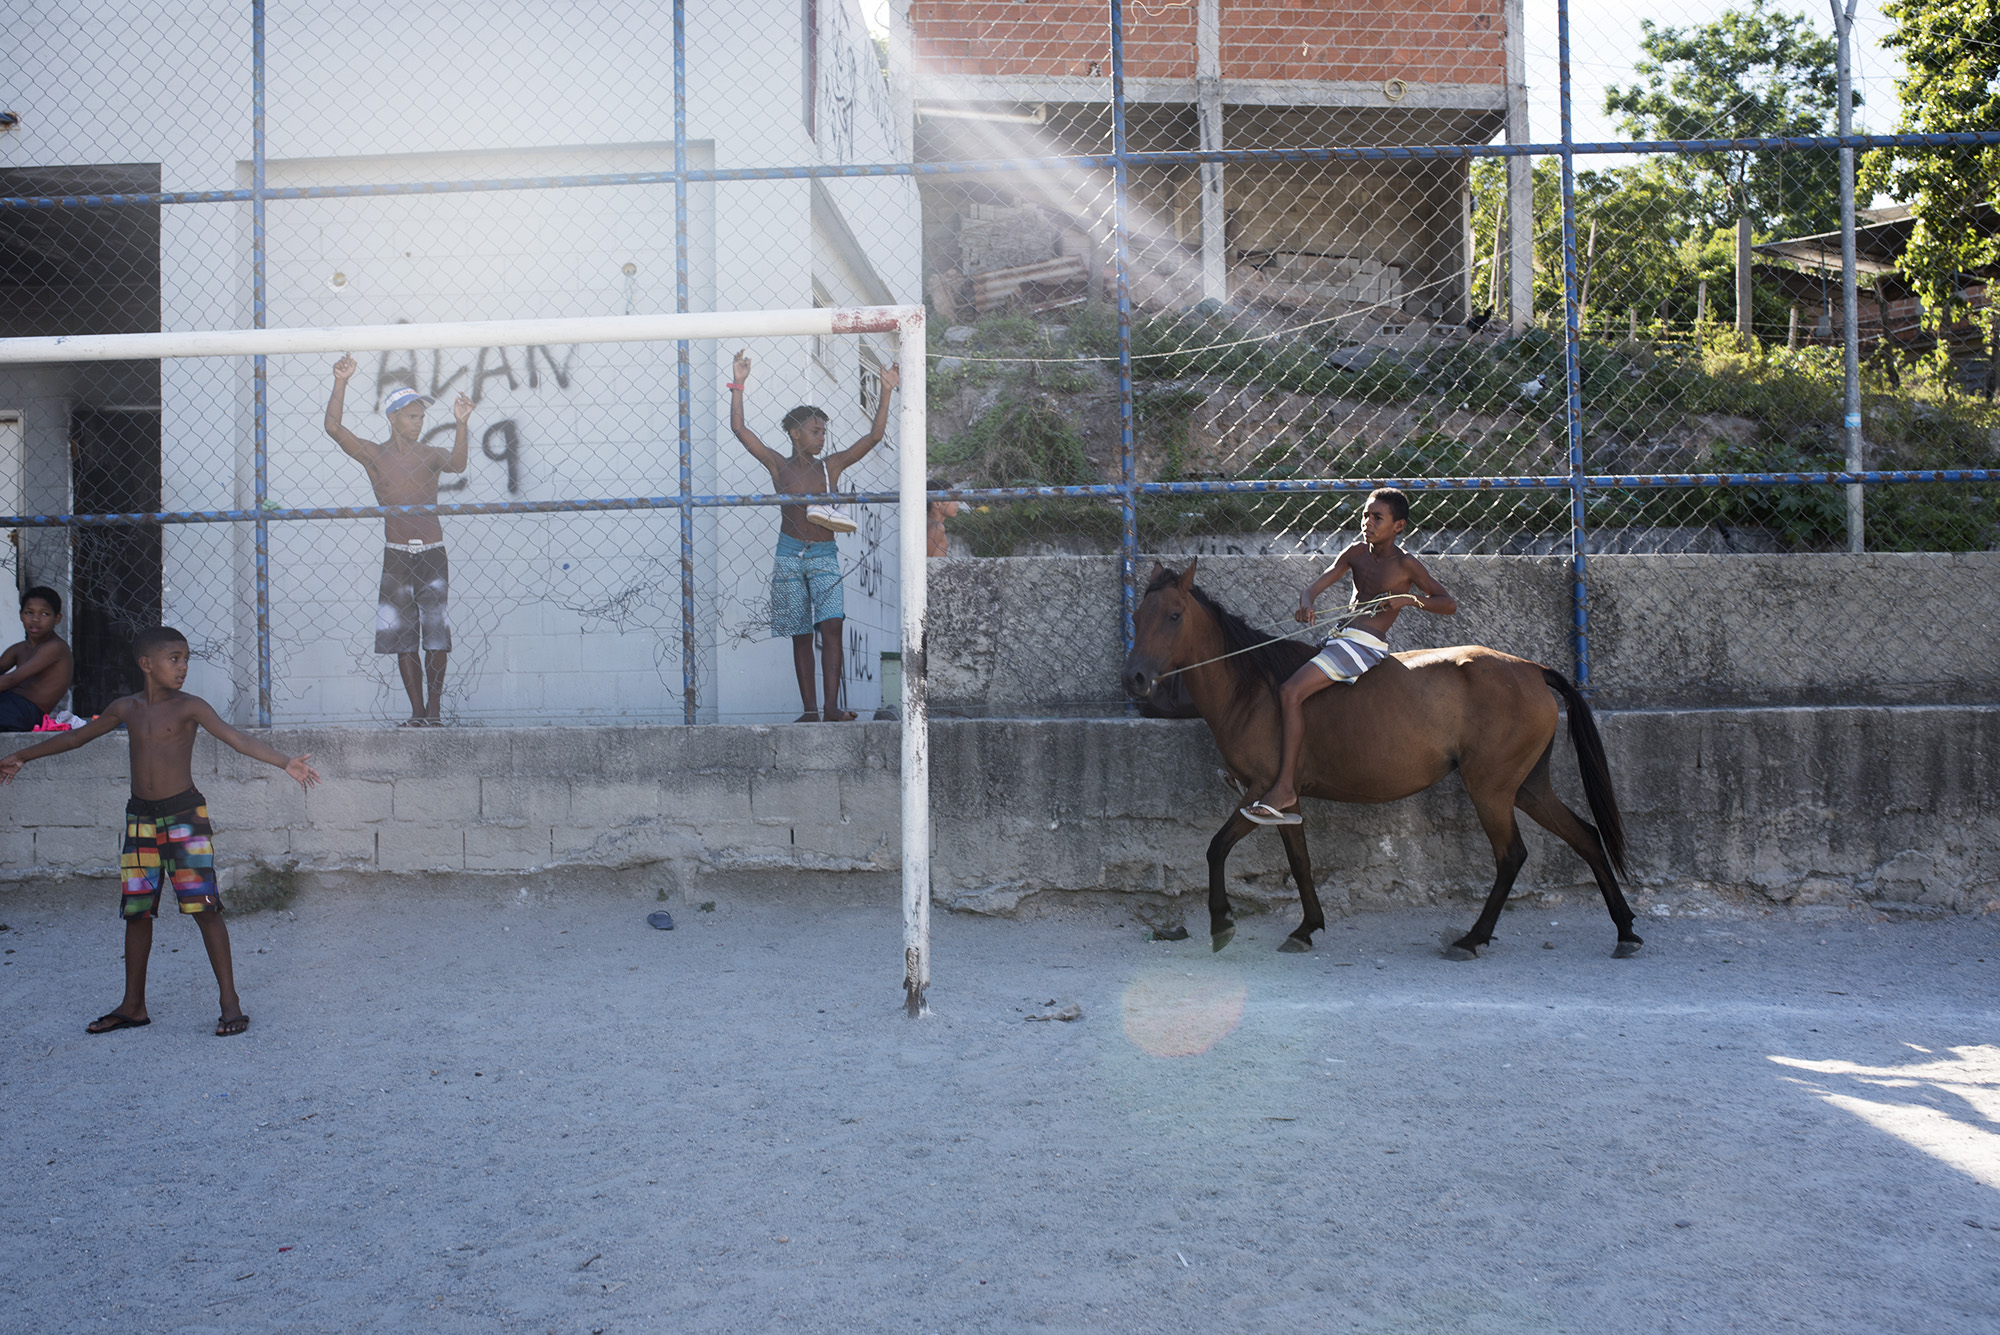  The kids are waiting for Fabio to give his weekly football training. In the meanwhile they’re horseback riding around the field of Vacaria. Vacaria is the most deprived and dangerous area of Vila Cruzeiro.  